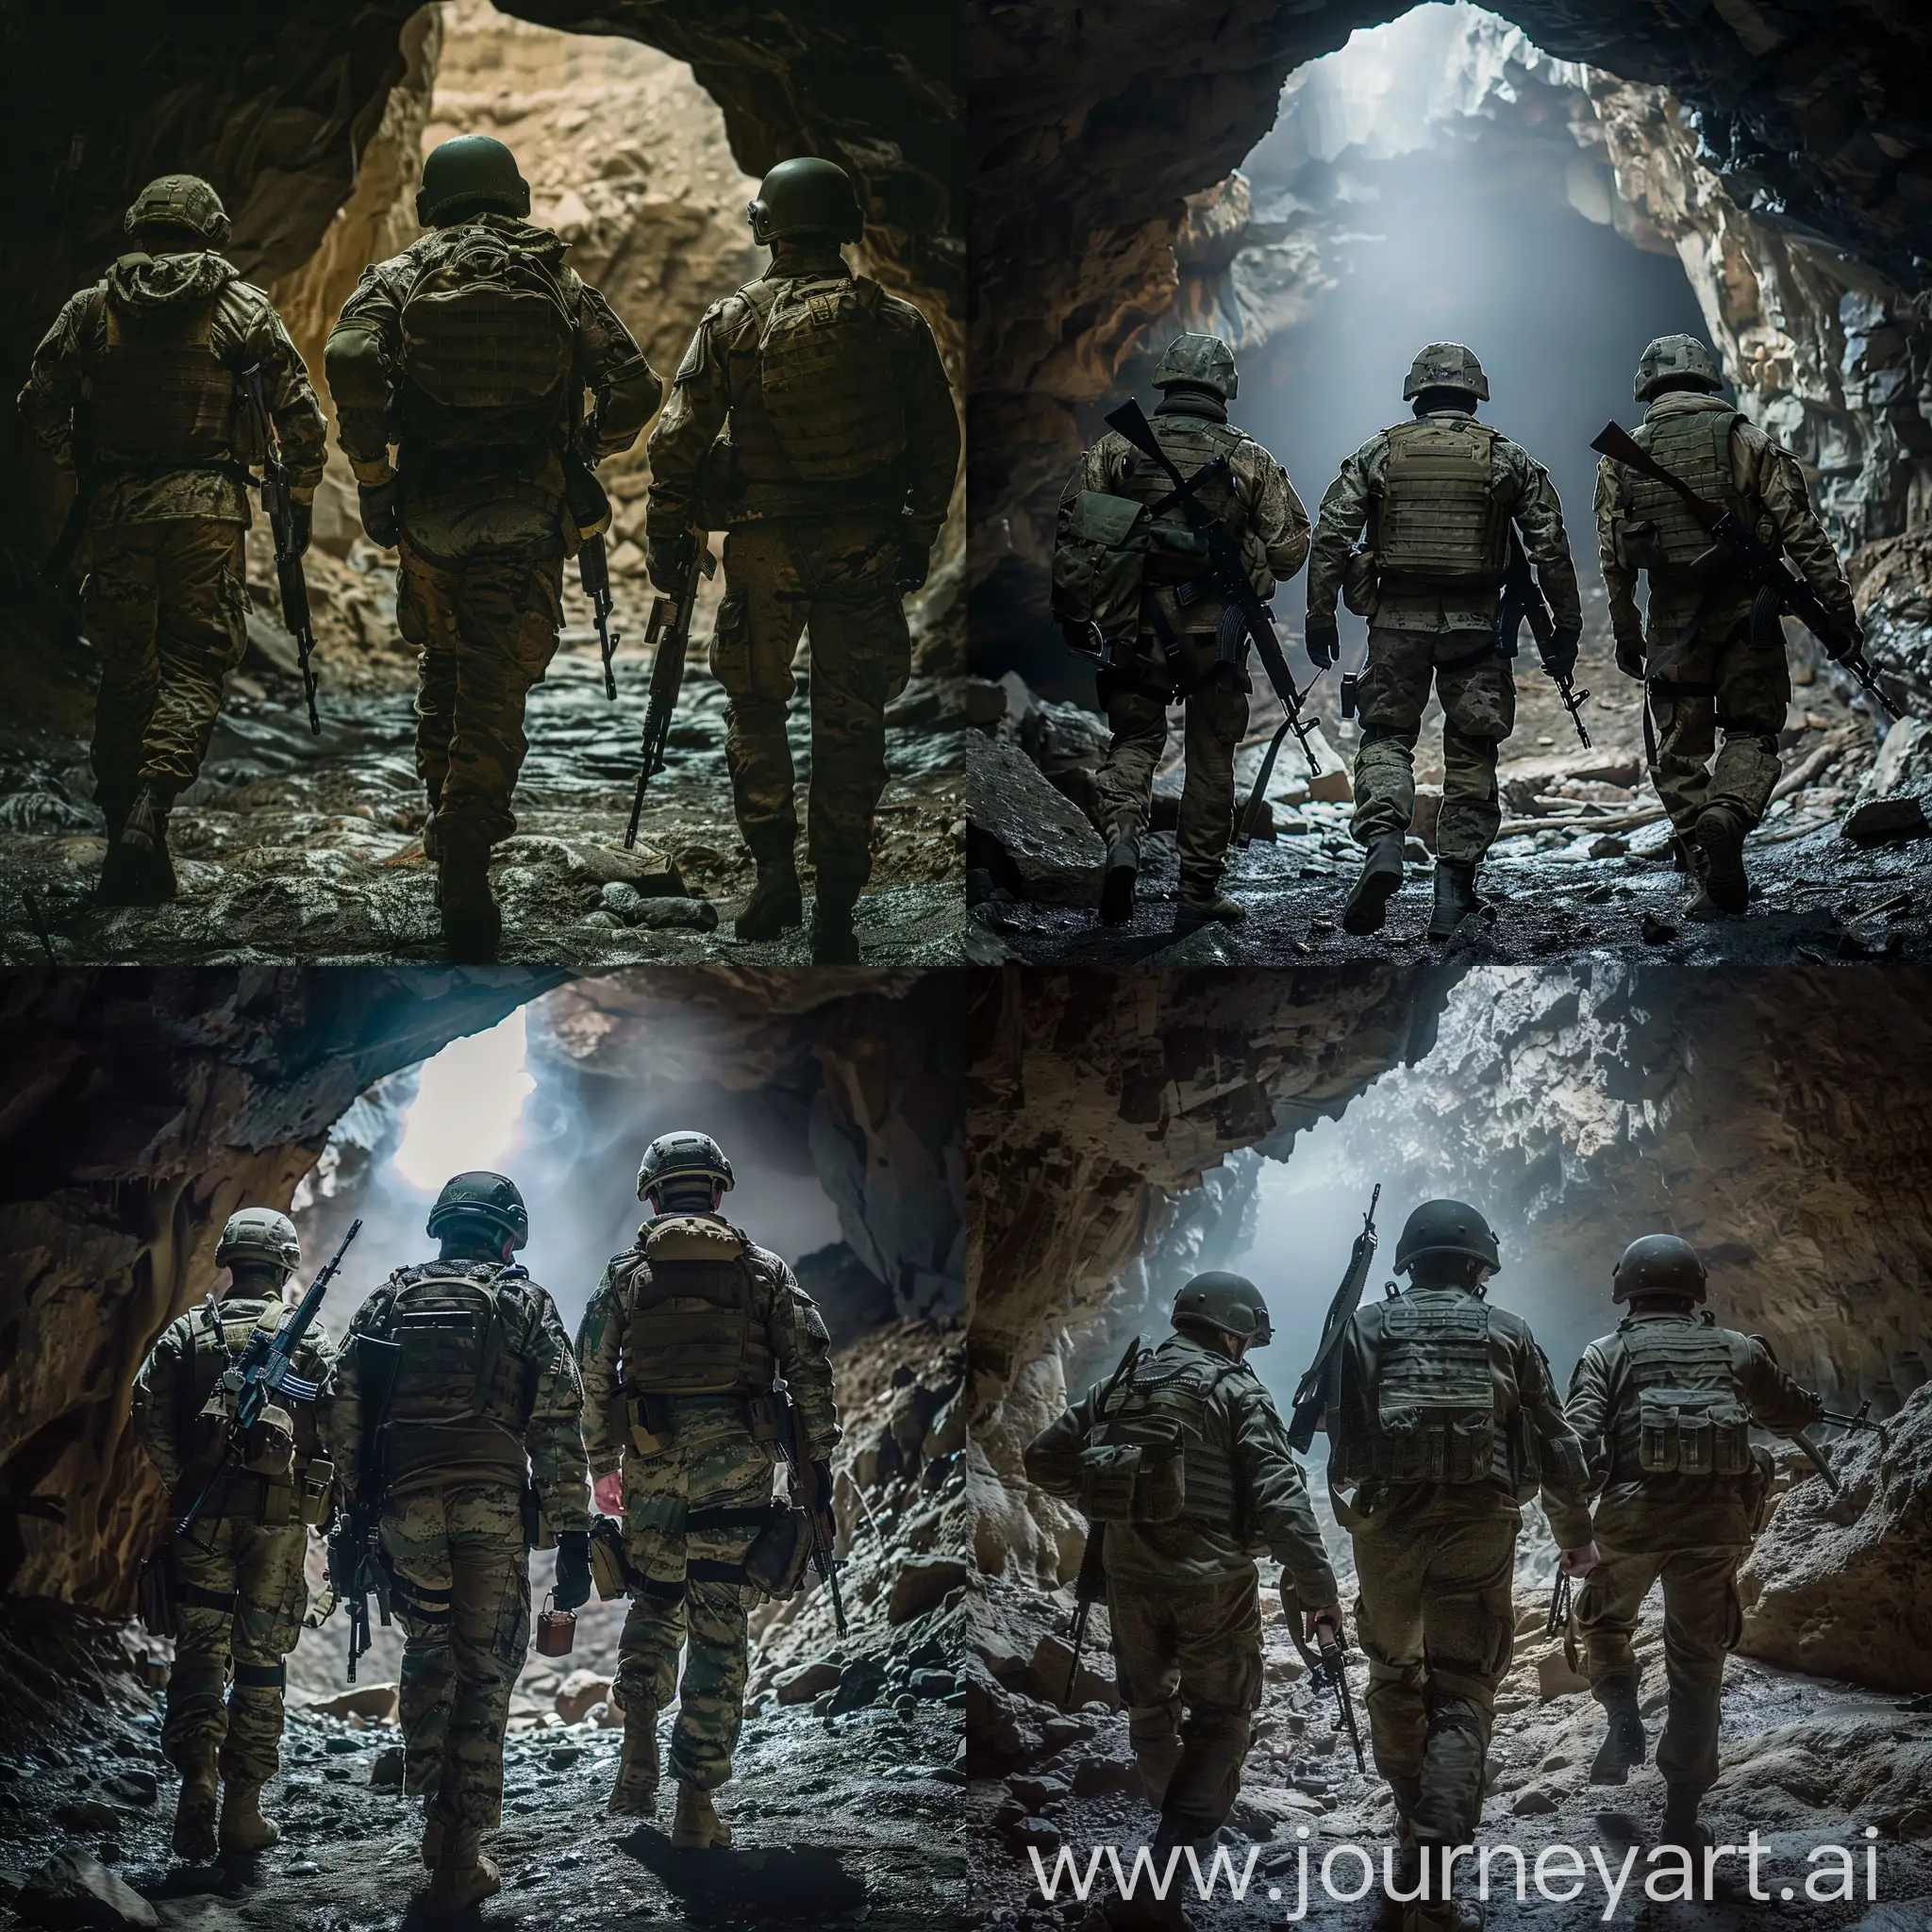 Three soldiers wearing military uniforms, helmets and sleeves, holding Kalashnikov weapons.  They walk behind each other in a dark cave, at the end of which is an opening through which light enters.back view